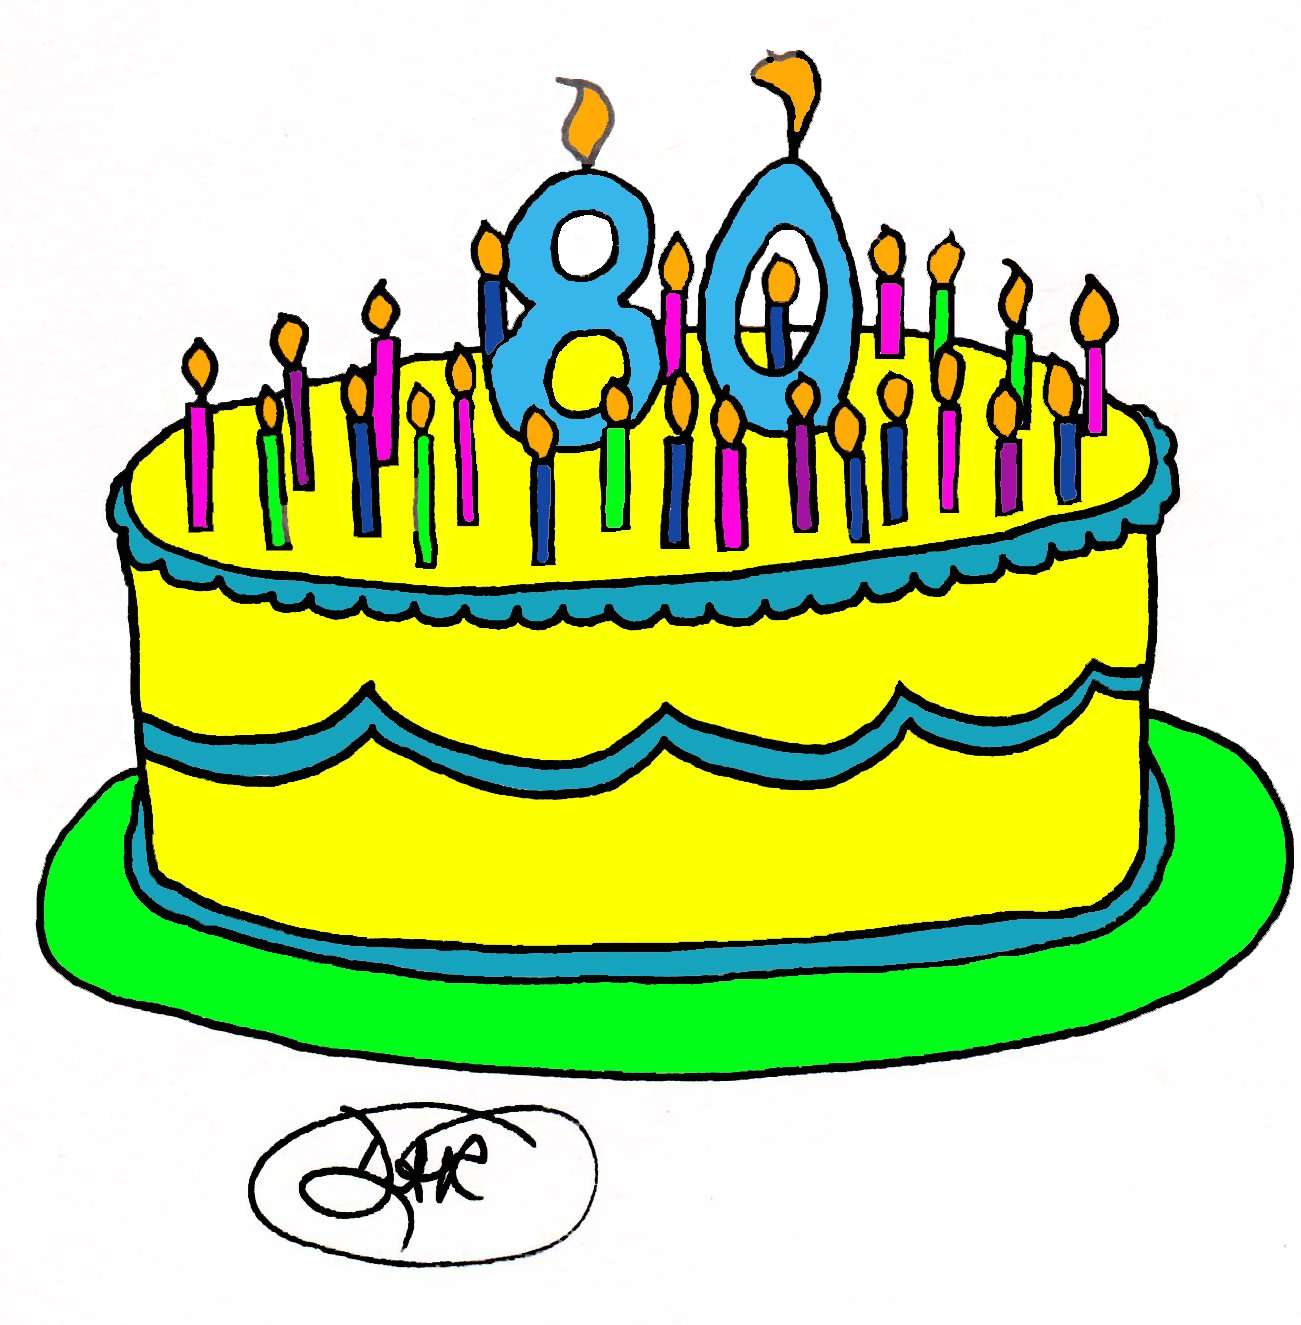 If you have a special someone celebrating a milestone birthday, here is a selection of 80th birthday poems to help brighten their day!